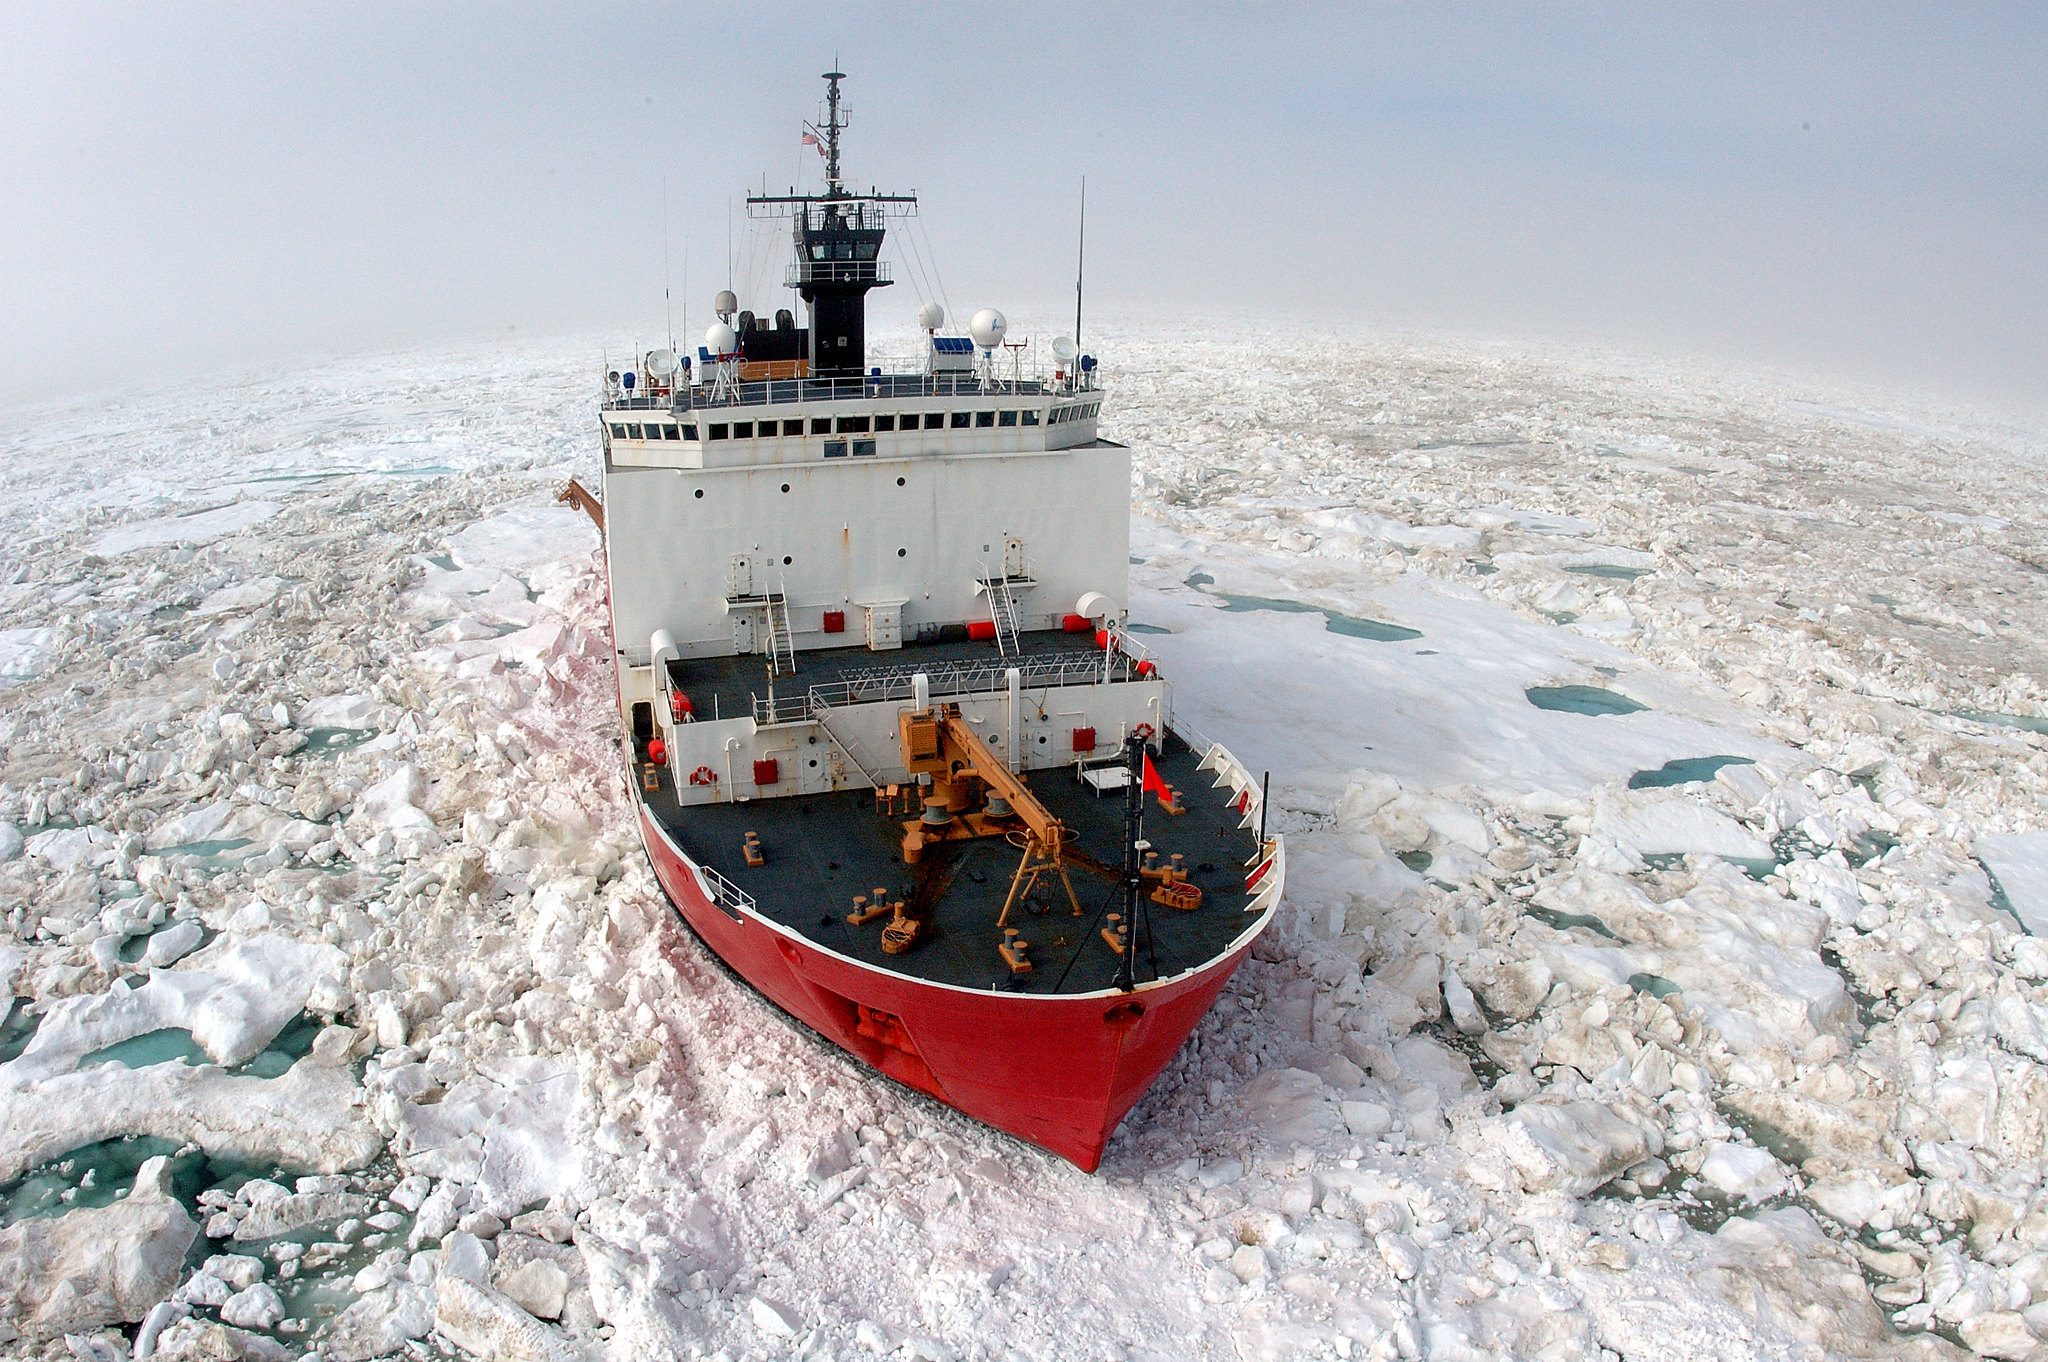 US Coast Guard proposes purchase of existing icebreaker as Arctic 'bridging  strategy' - ArcticToday